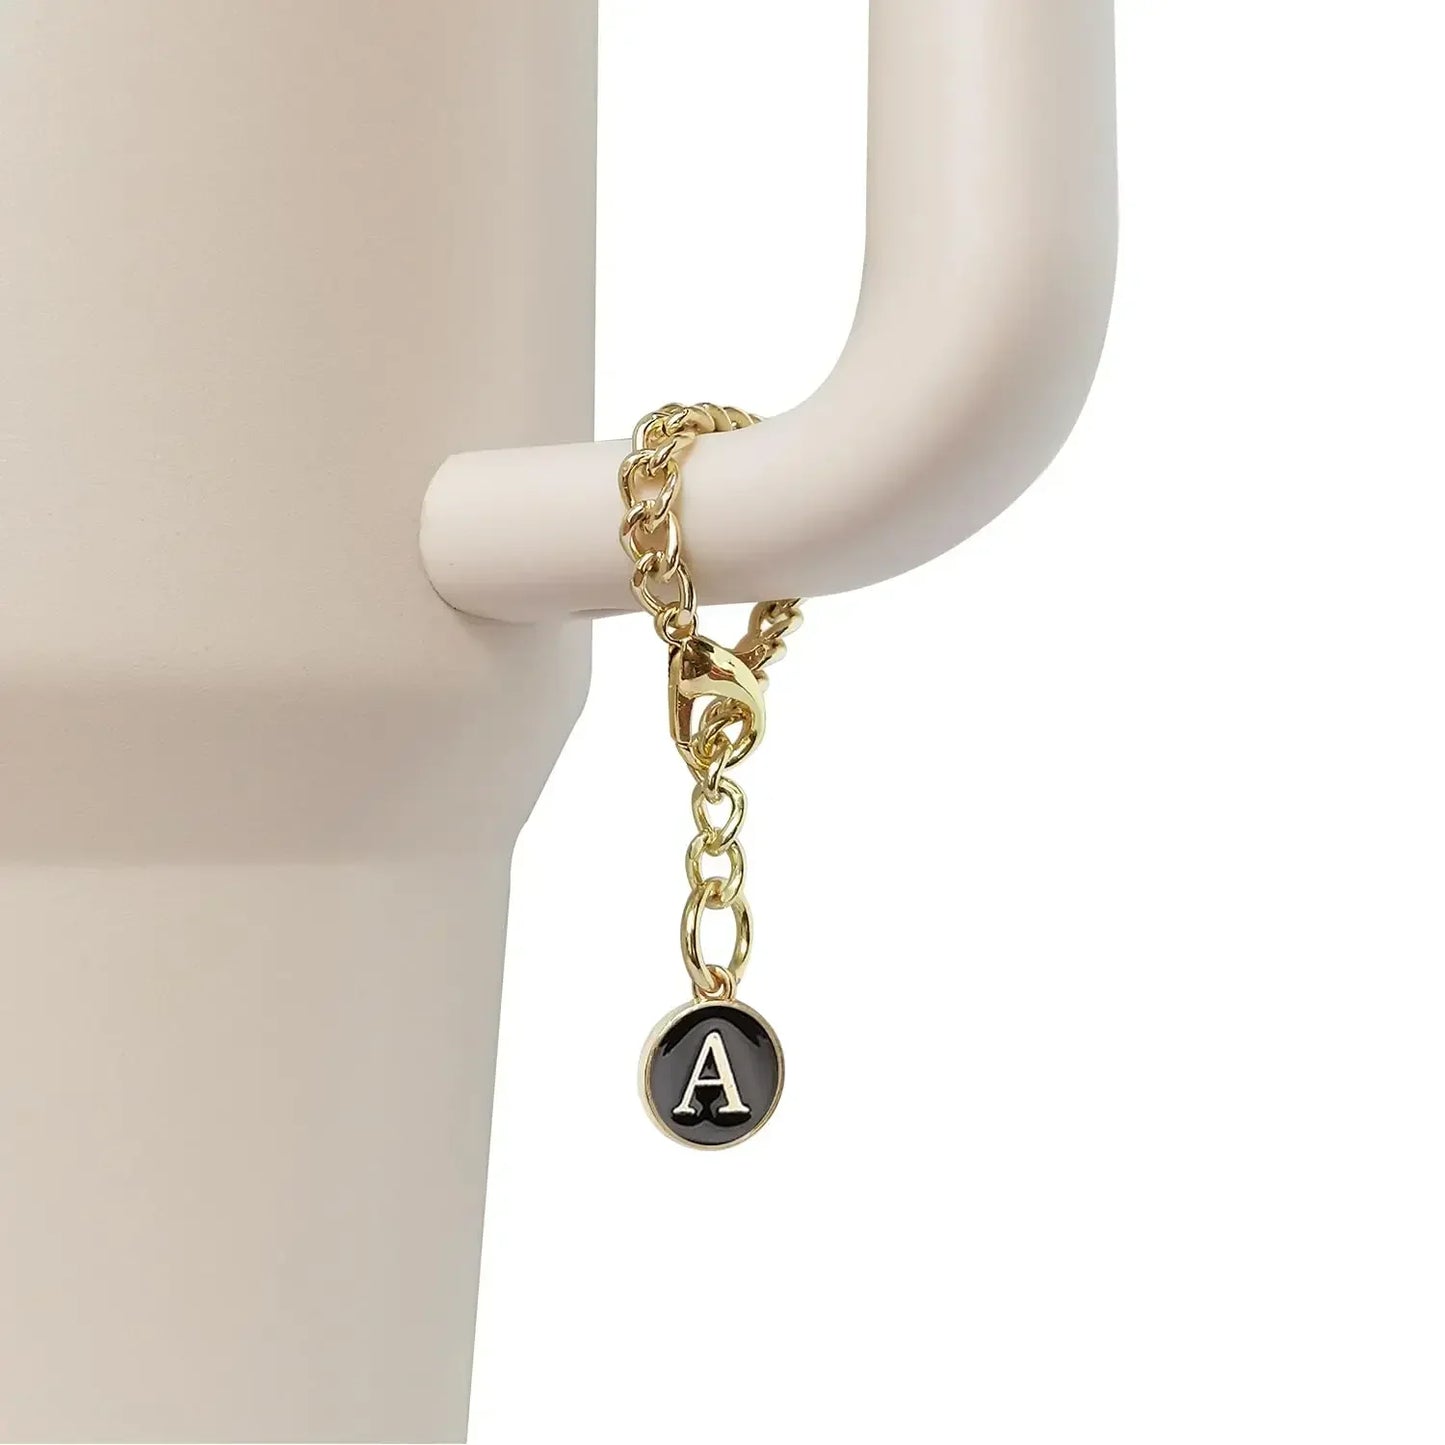 Personalised Letter Charm for Stanley Cups